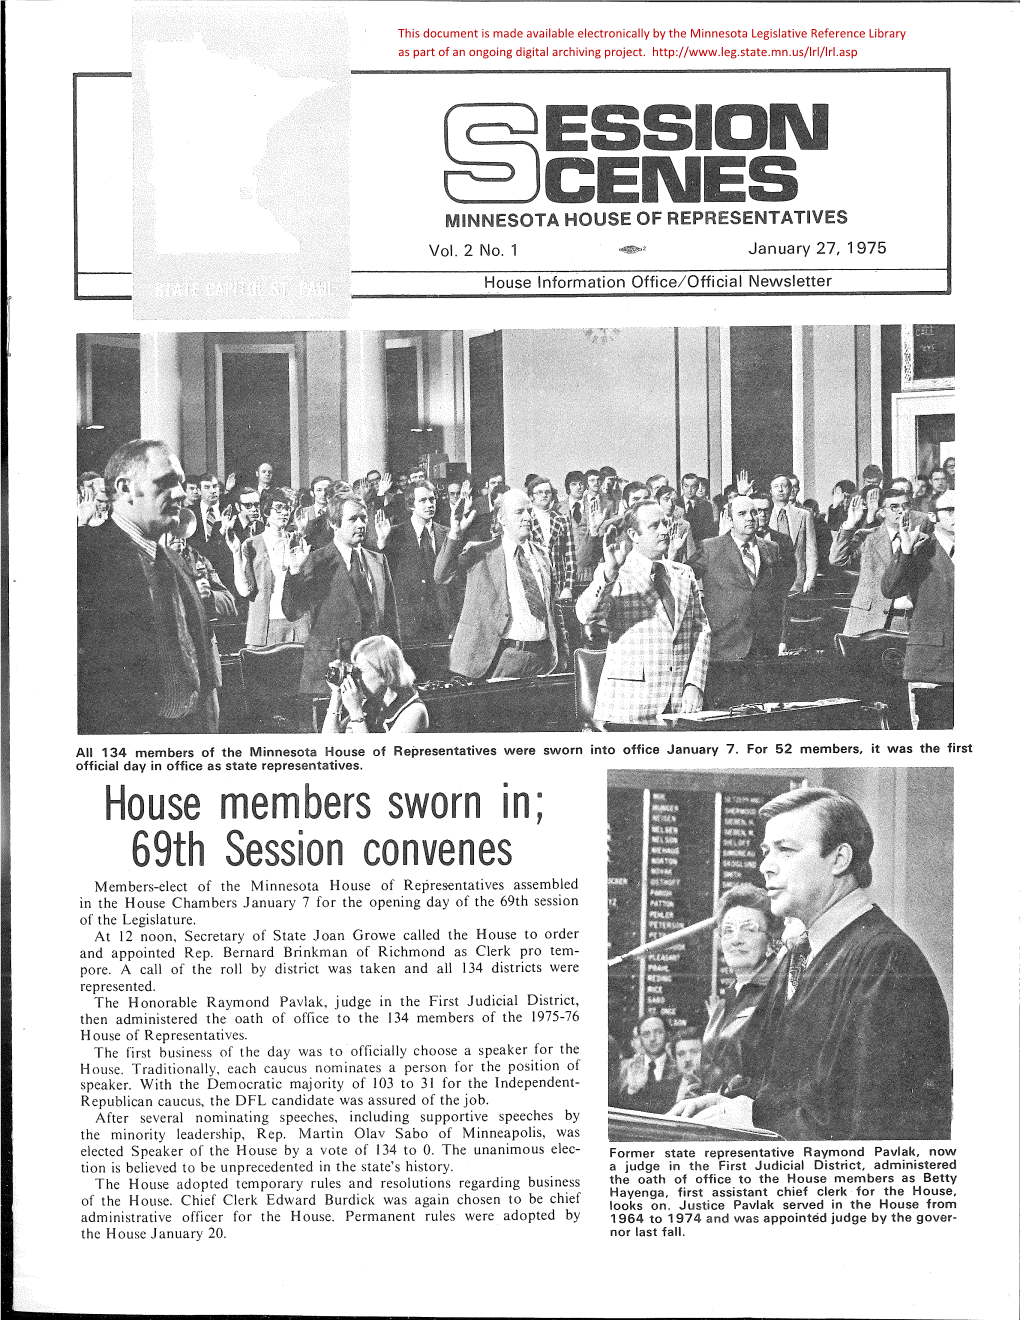 Vol. 2 No. 1 January 27, 1975 House Information Office/Official Newsletter